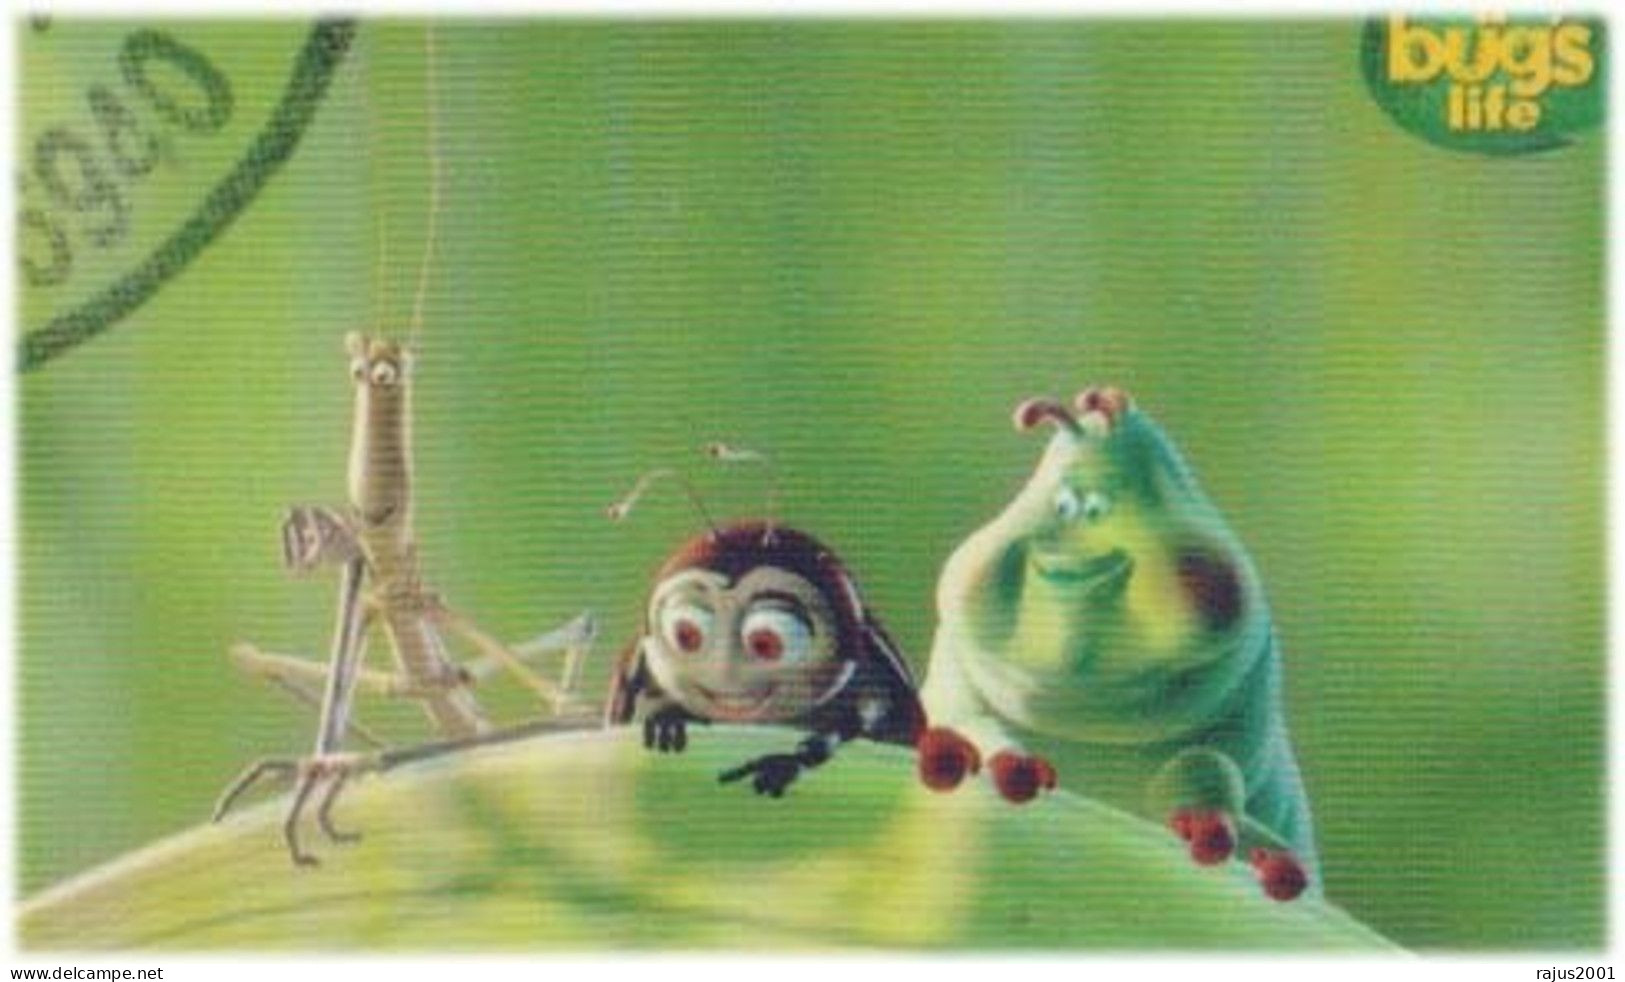 Disney Pixar, Bug, Bugs Life, Insects, Insect, Queen Ant, Ants, Beetles, Butterfly,  Cartoon, Animal, Souvenir Sheet FDC - Schmetterlinge